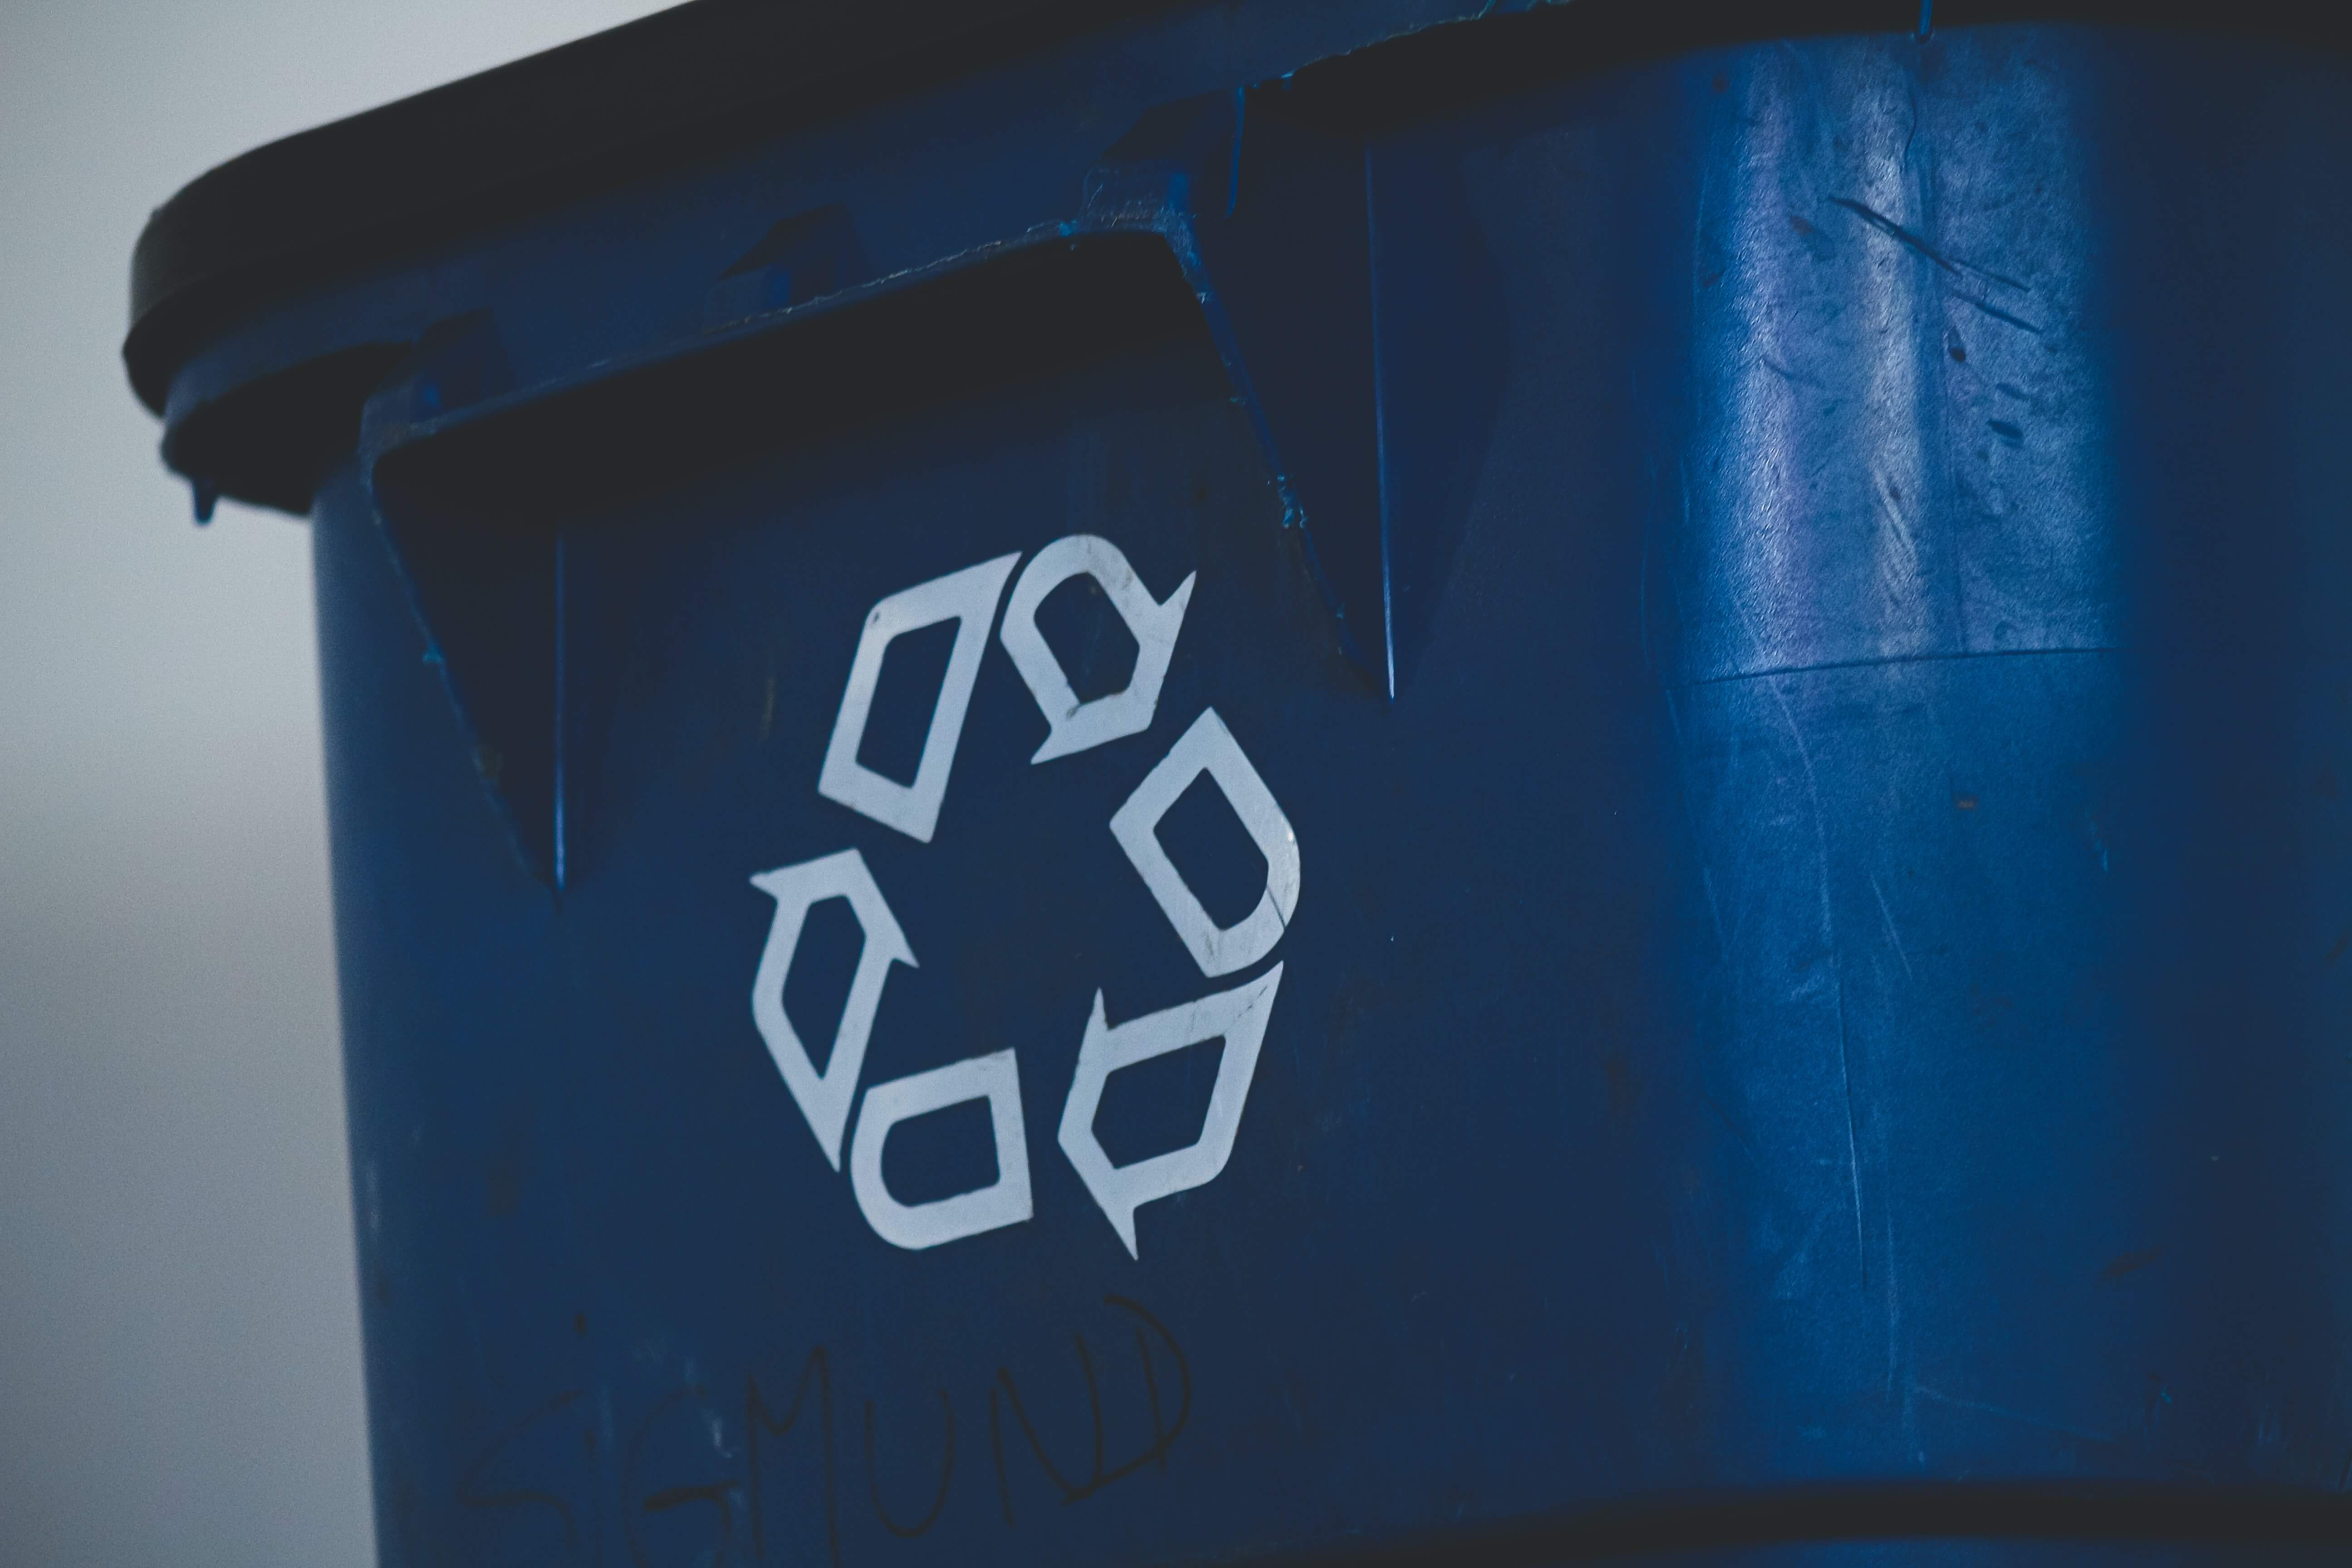 A recycling bin with the symbol on the front